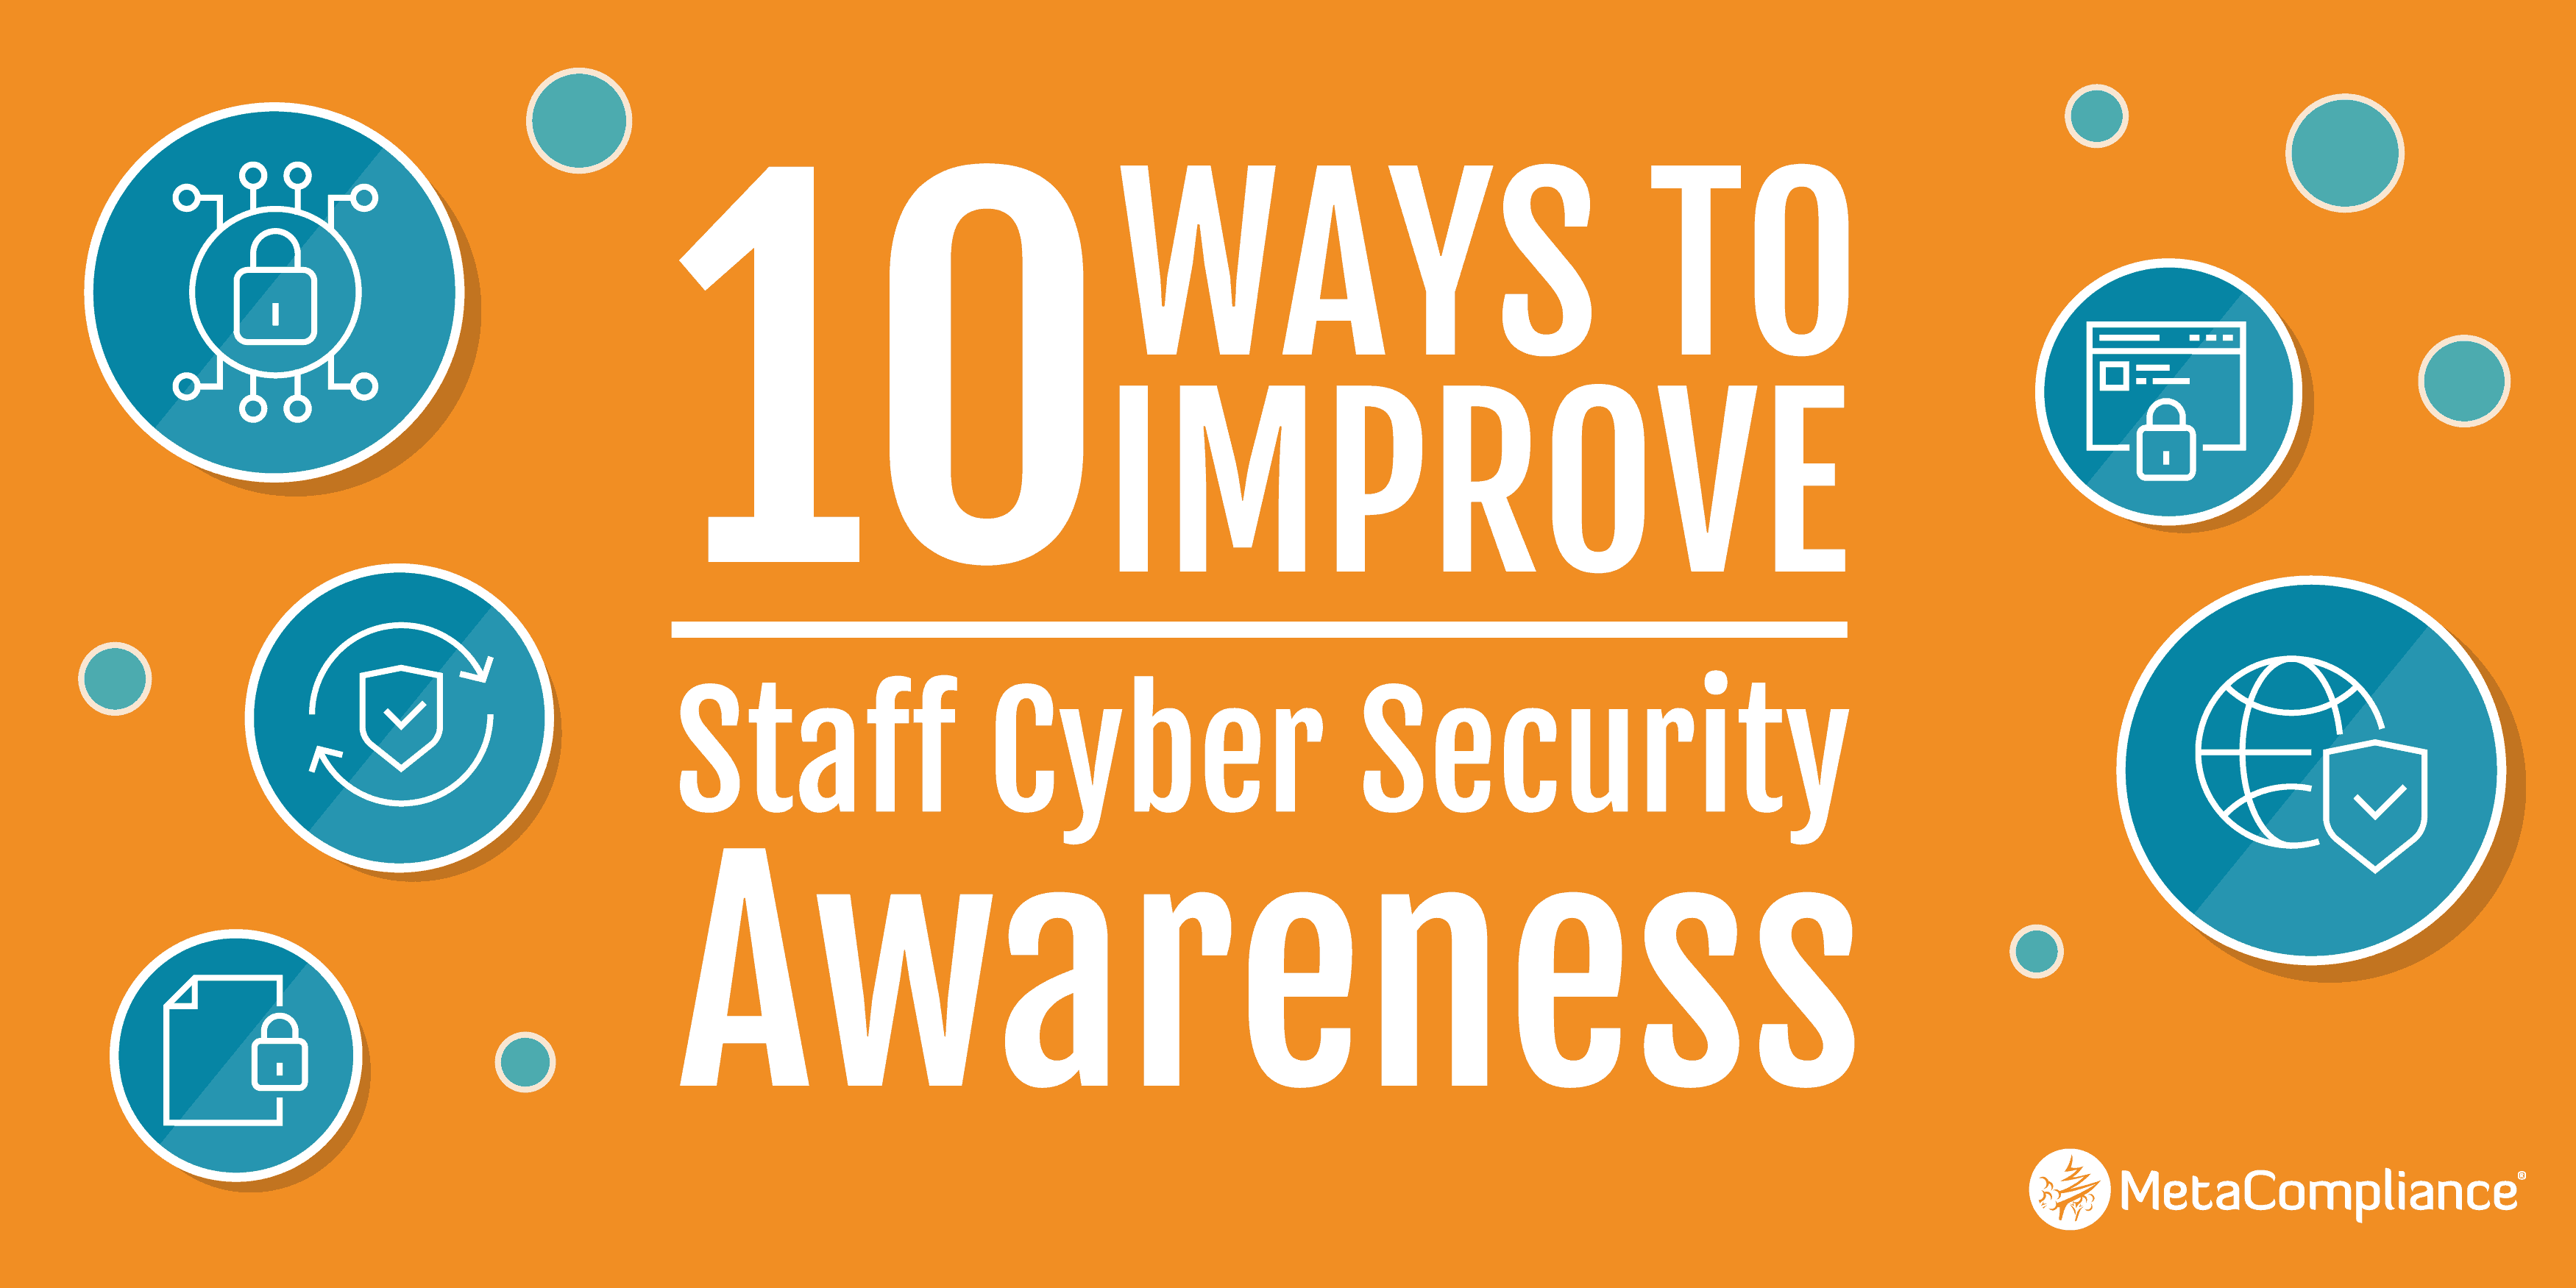 MetaCompliance Launches Free Guide: 10 Ways to Improve Staff Cyber Security Awareness